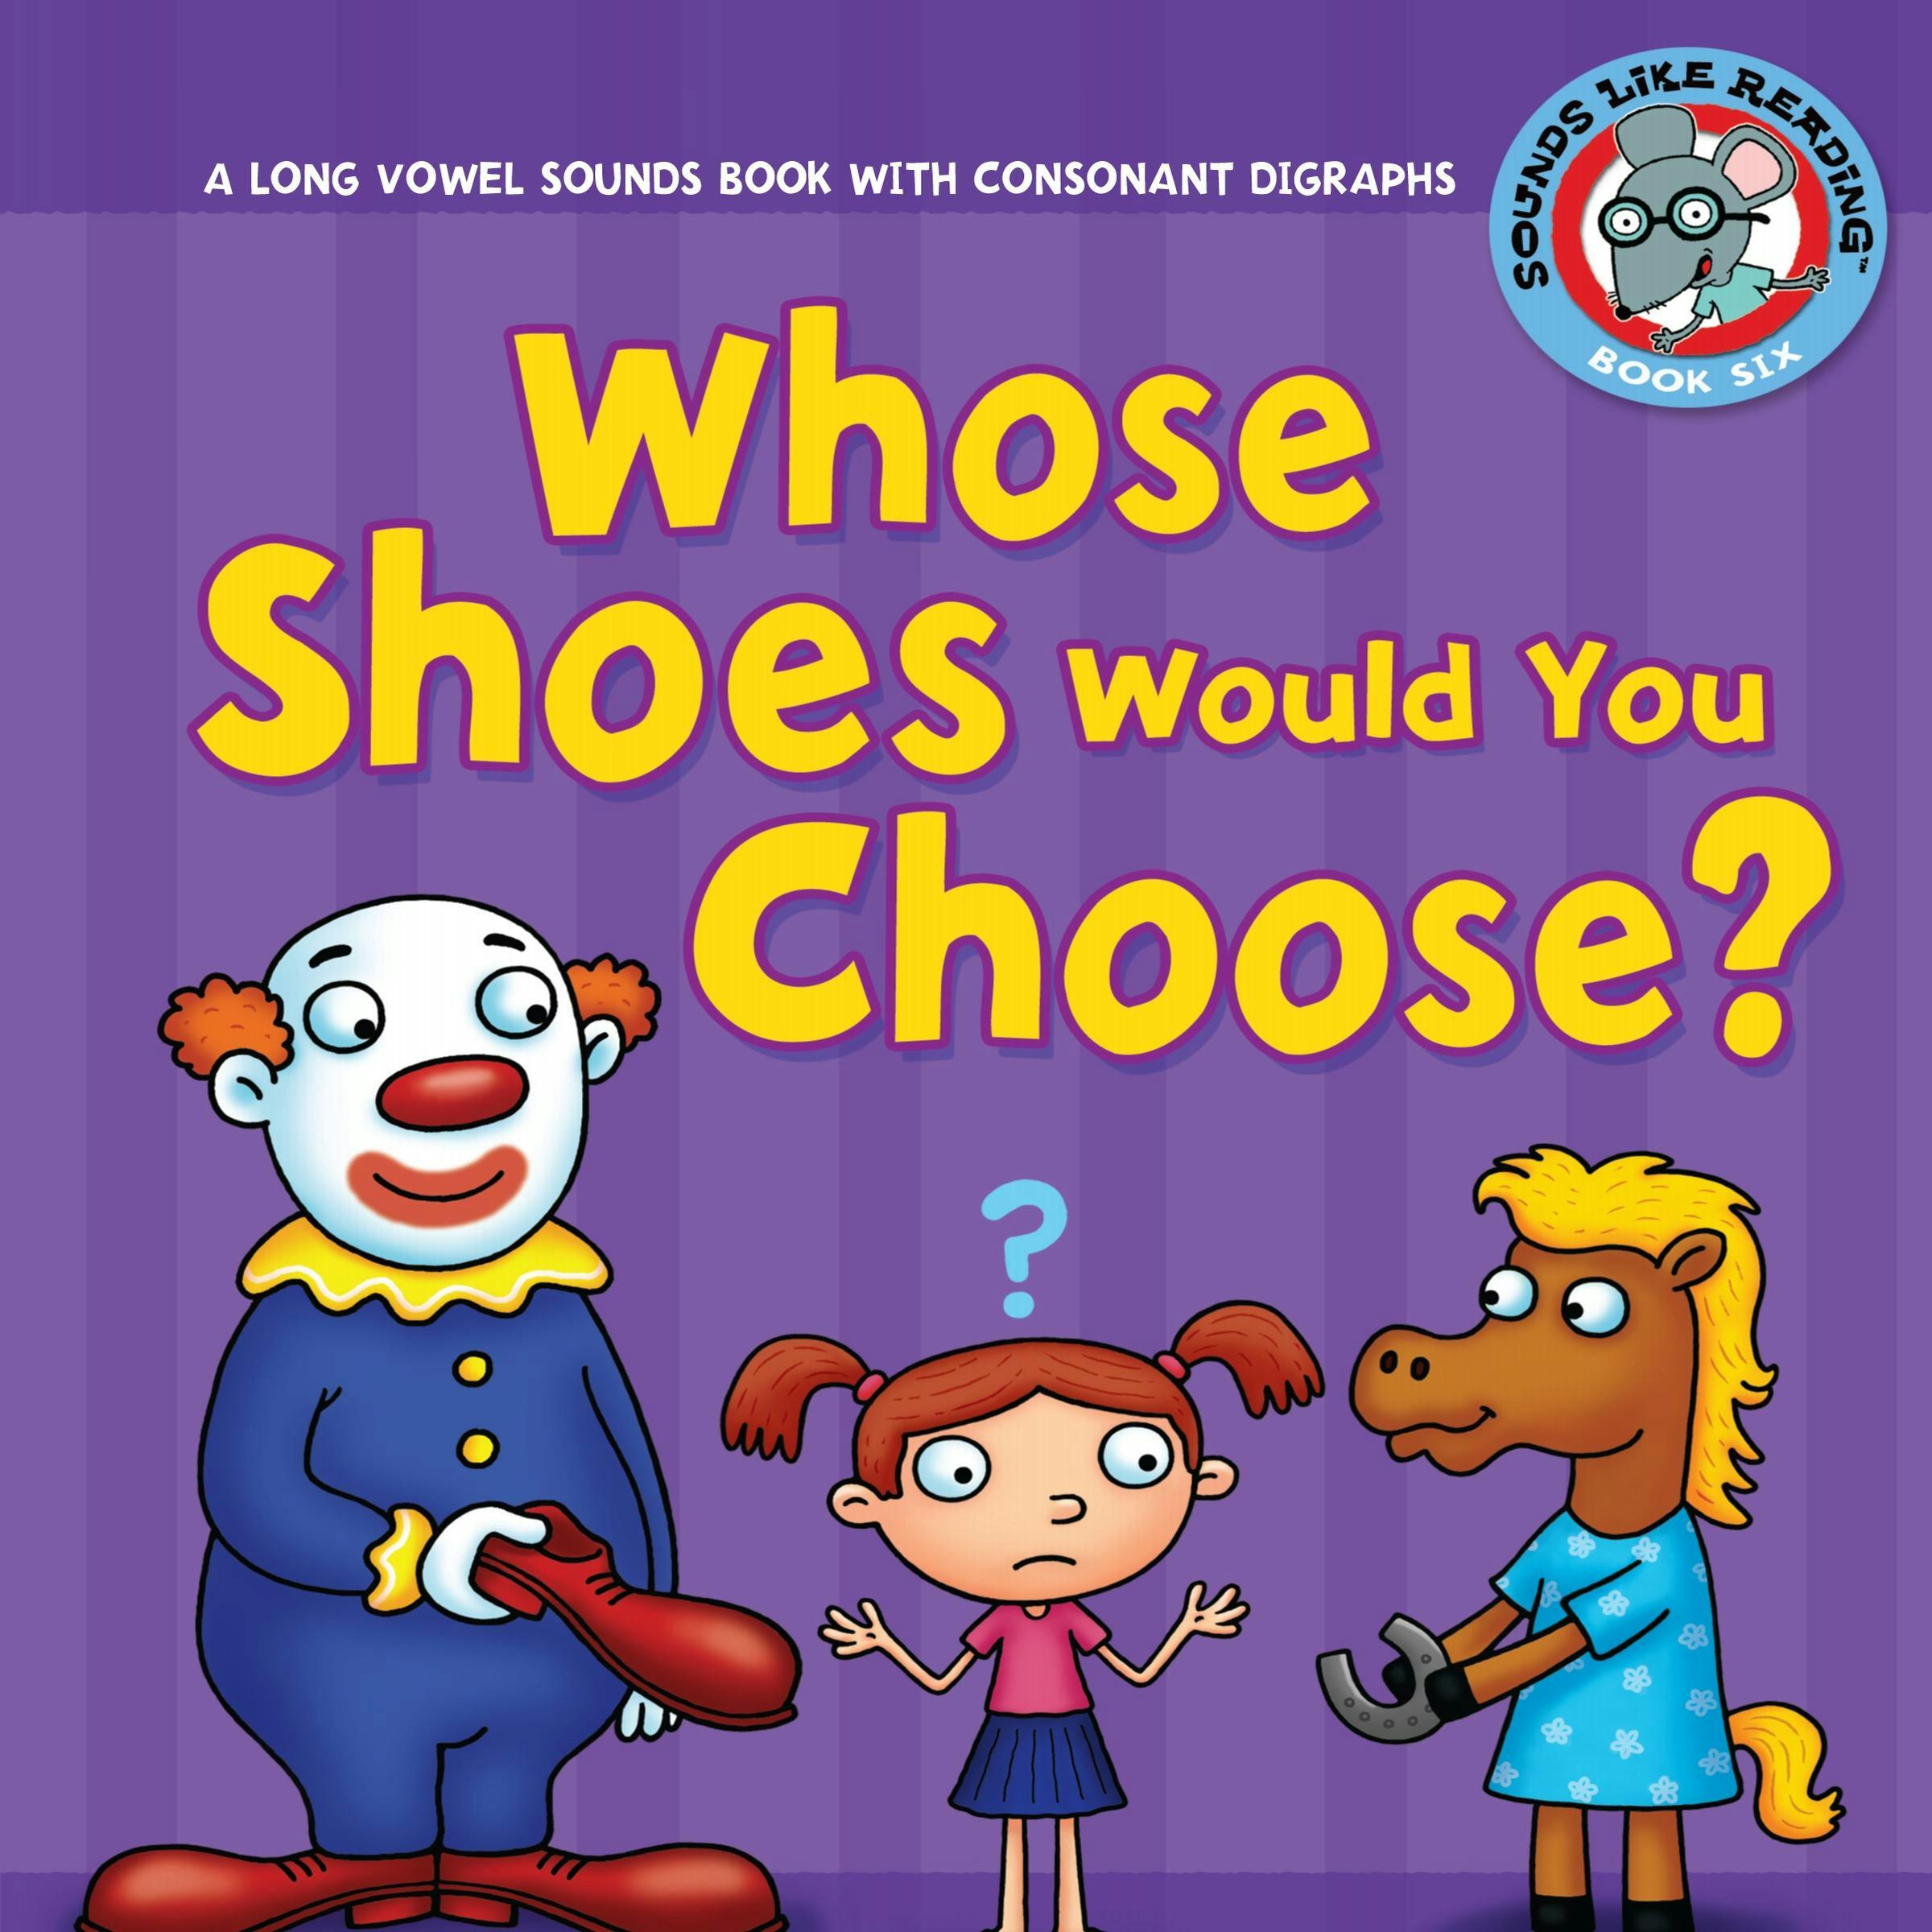 Whose Shoes Would You Choose?: A Long Vowel Sounds Book with Consonant Digraphs - Jason Miskimins, Brian P. Cleary